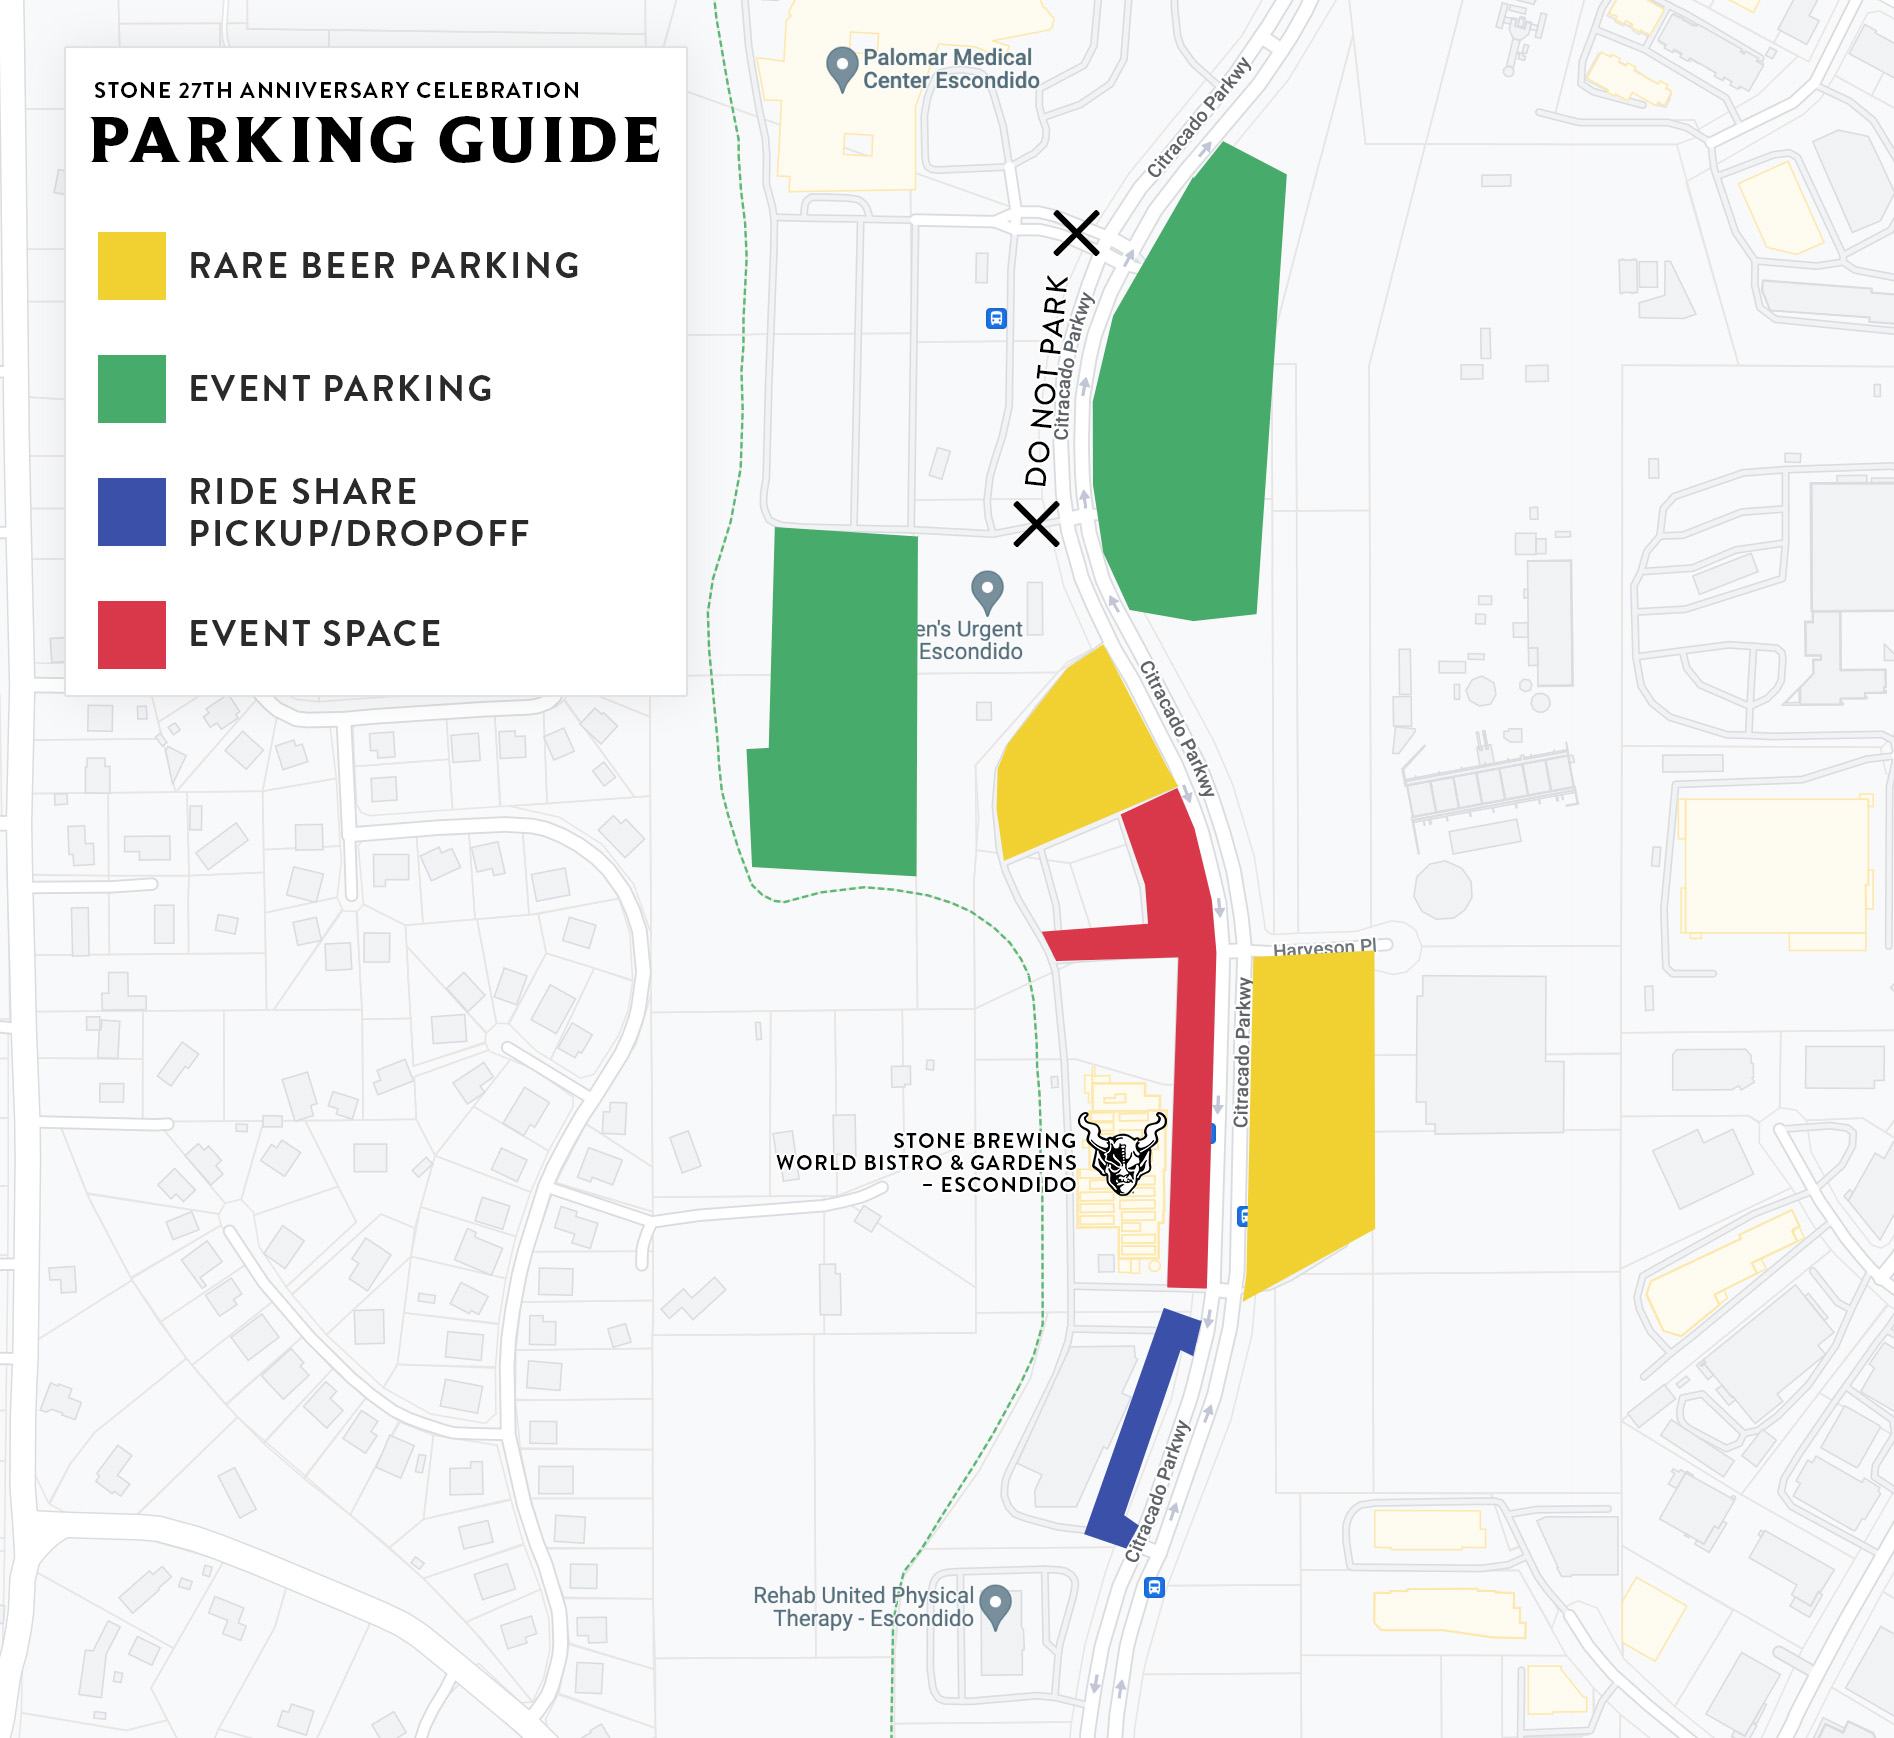 parking map for Stone's 27th anniversary celebration